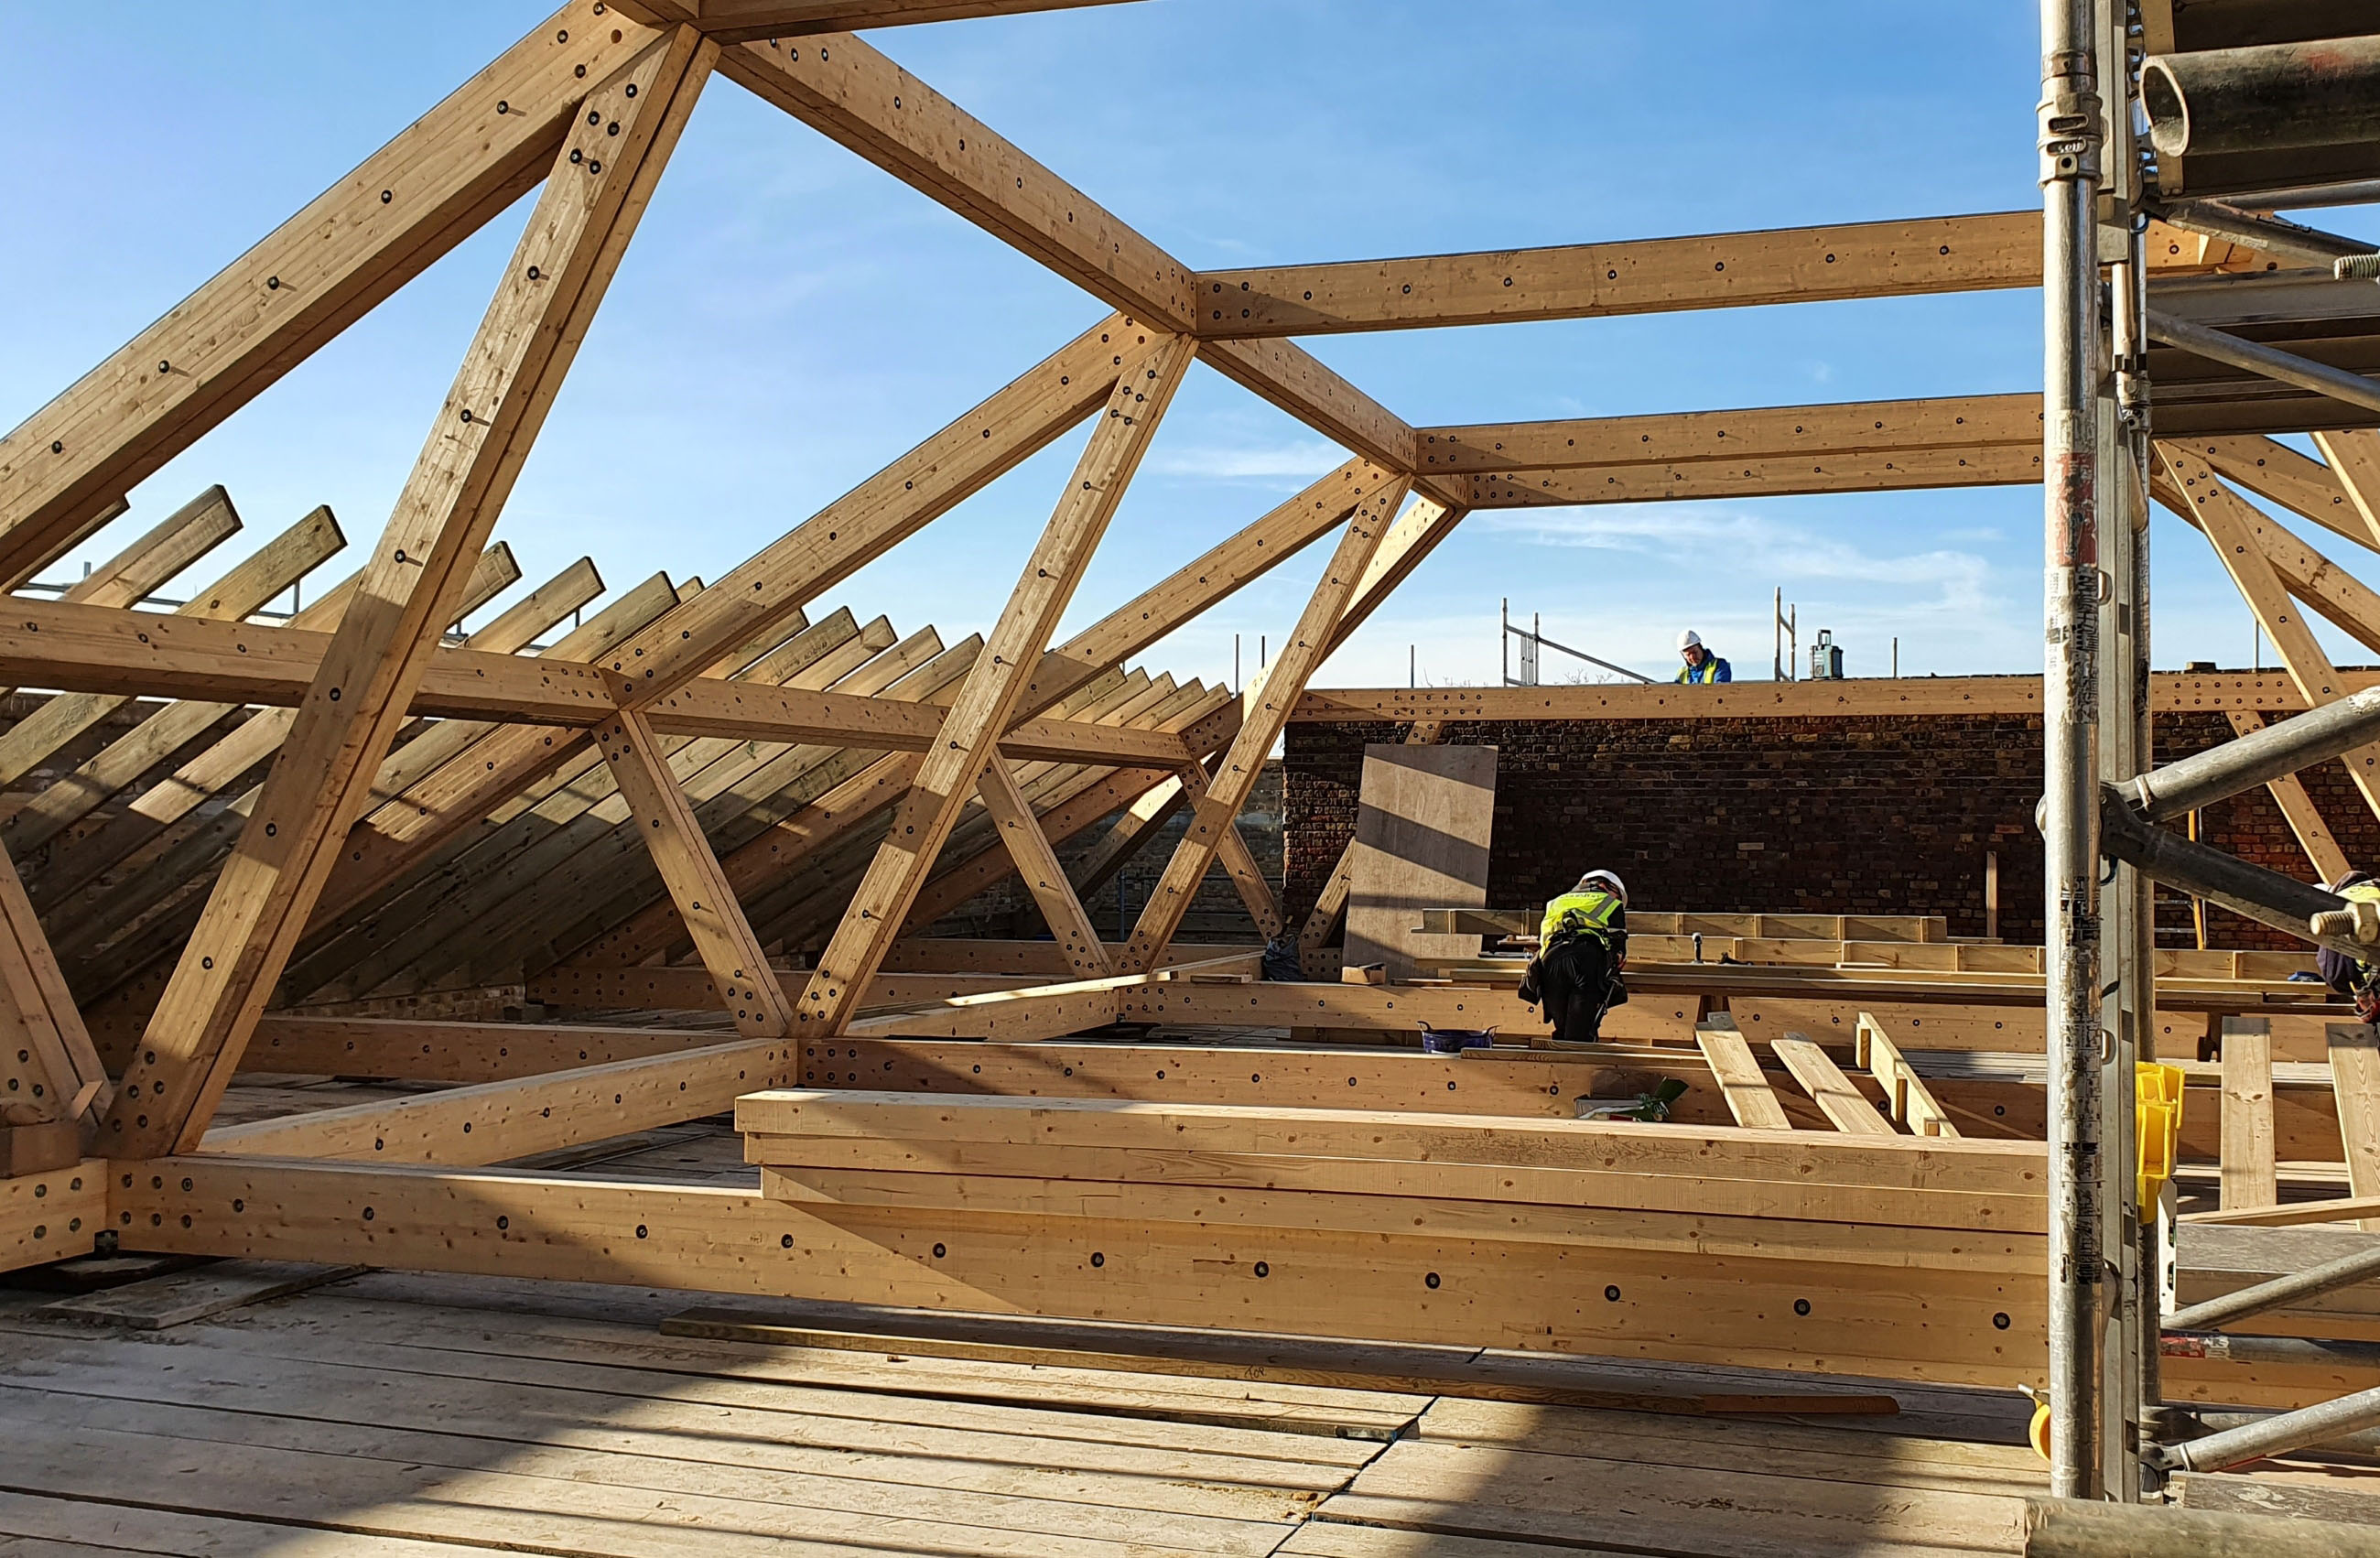 New roof timbers constructed into a frame structure